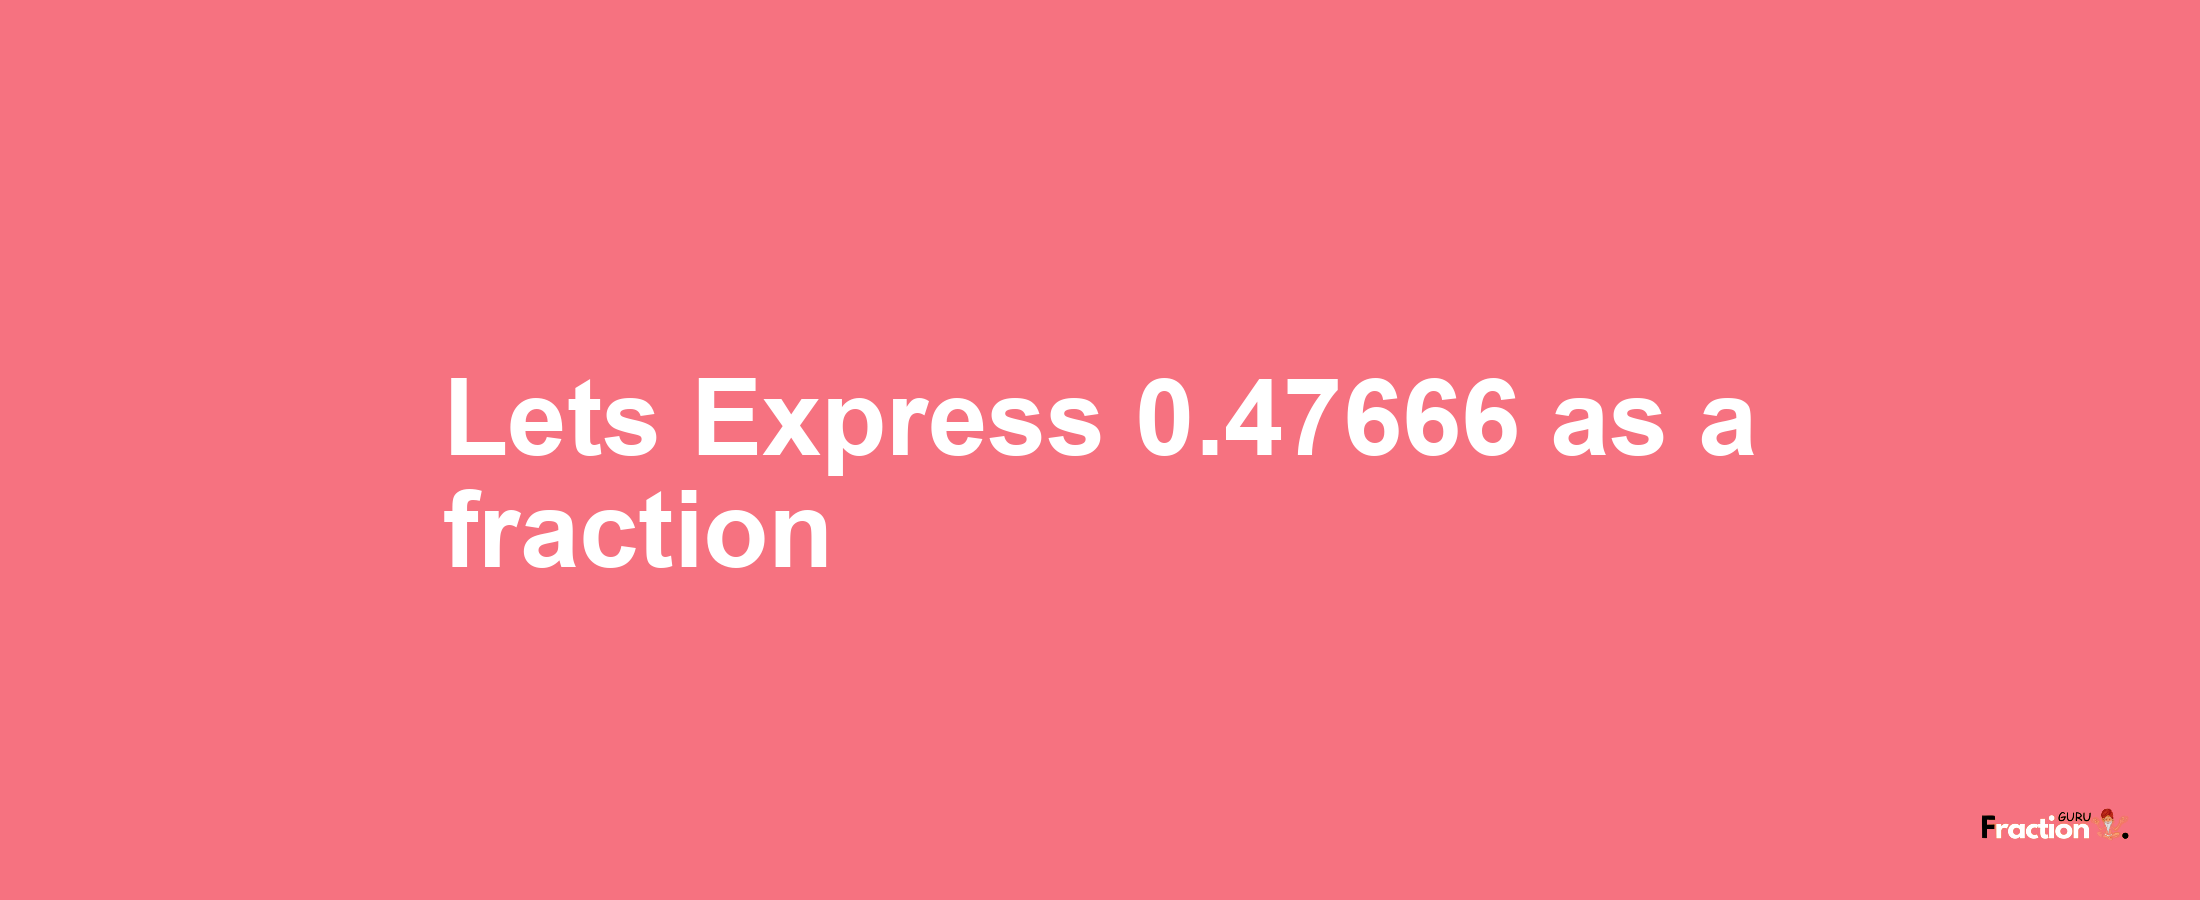 Lets Express 0.47666 as afraction